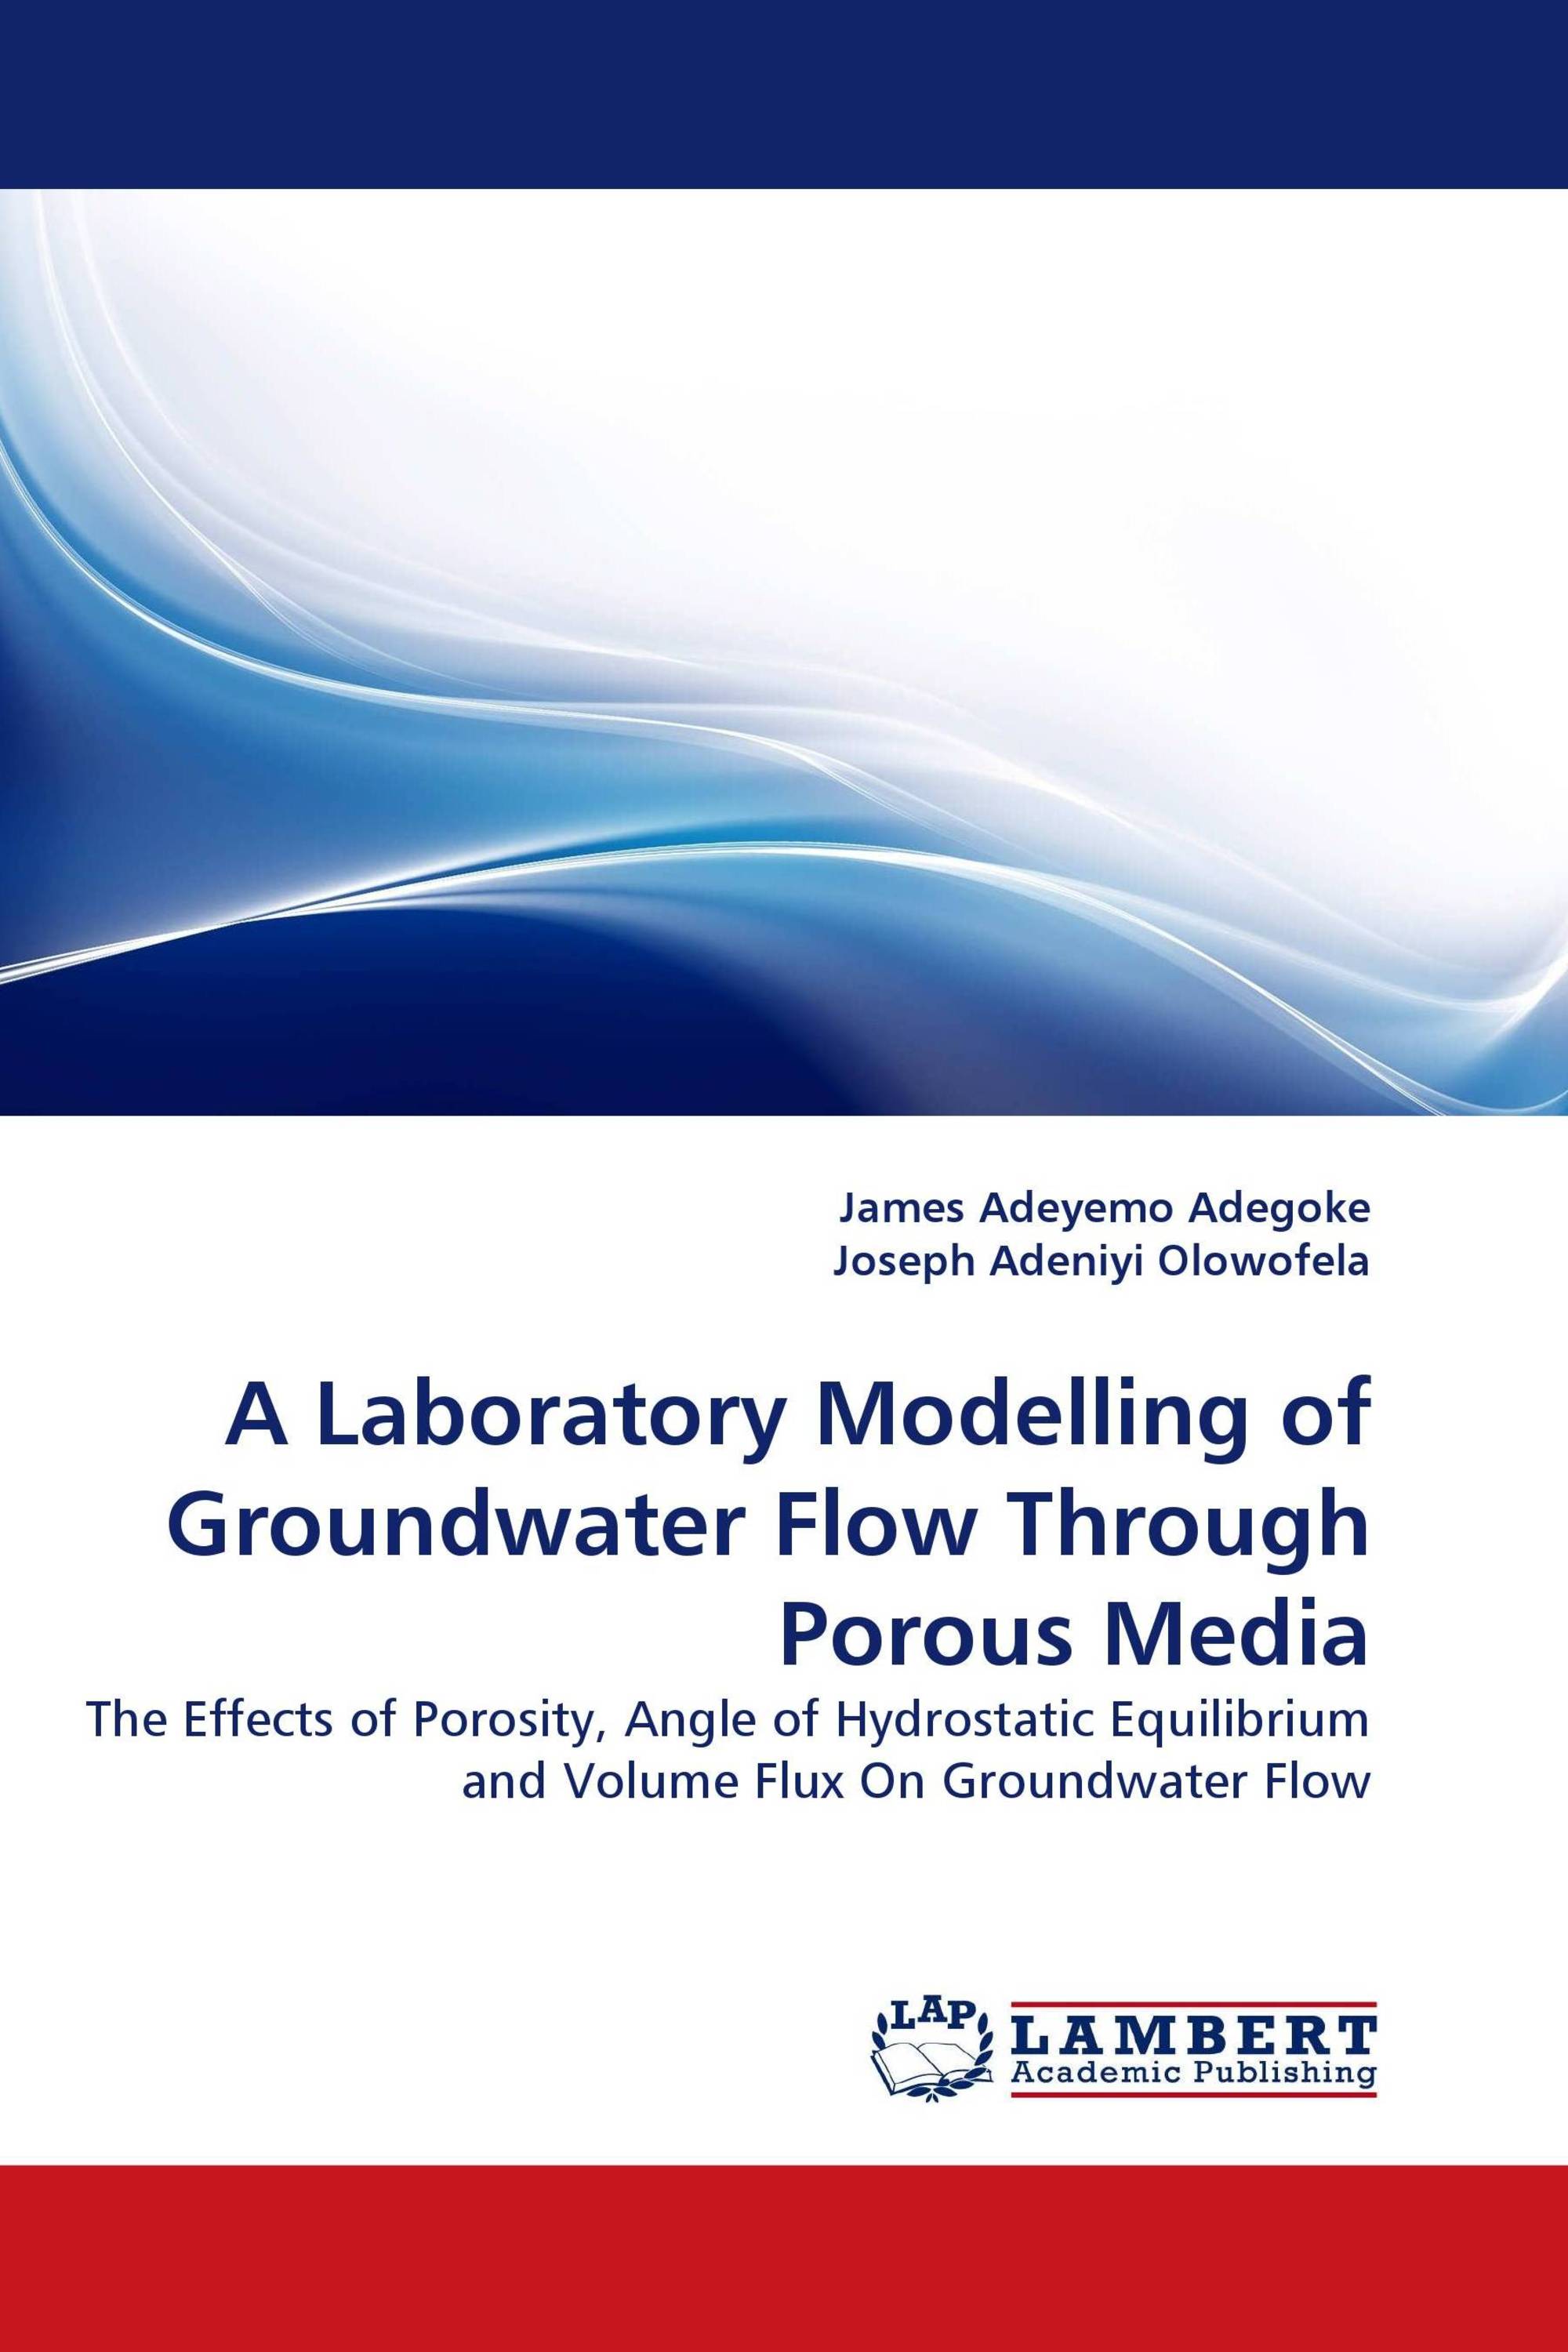 A Laboratory Modelling of Groundwater Flow Through Porous Media